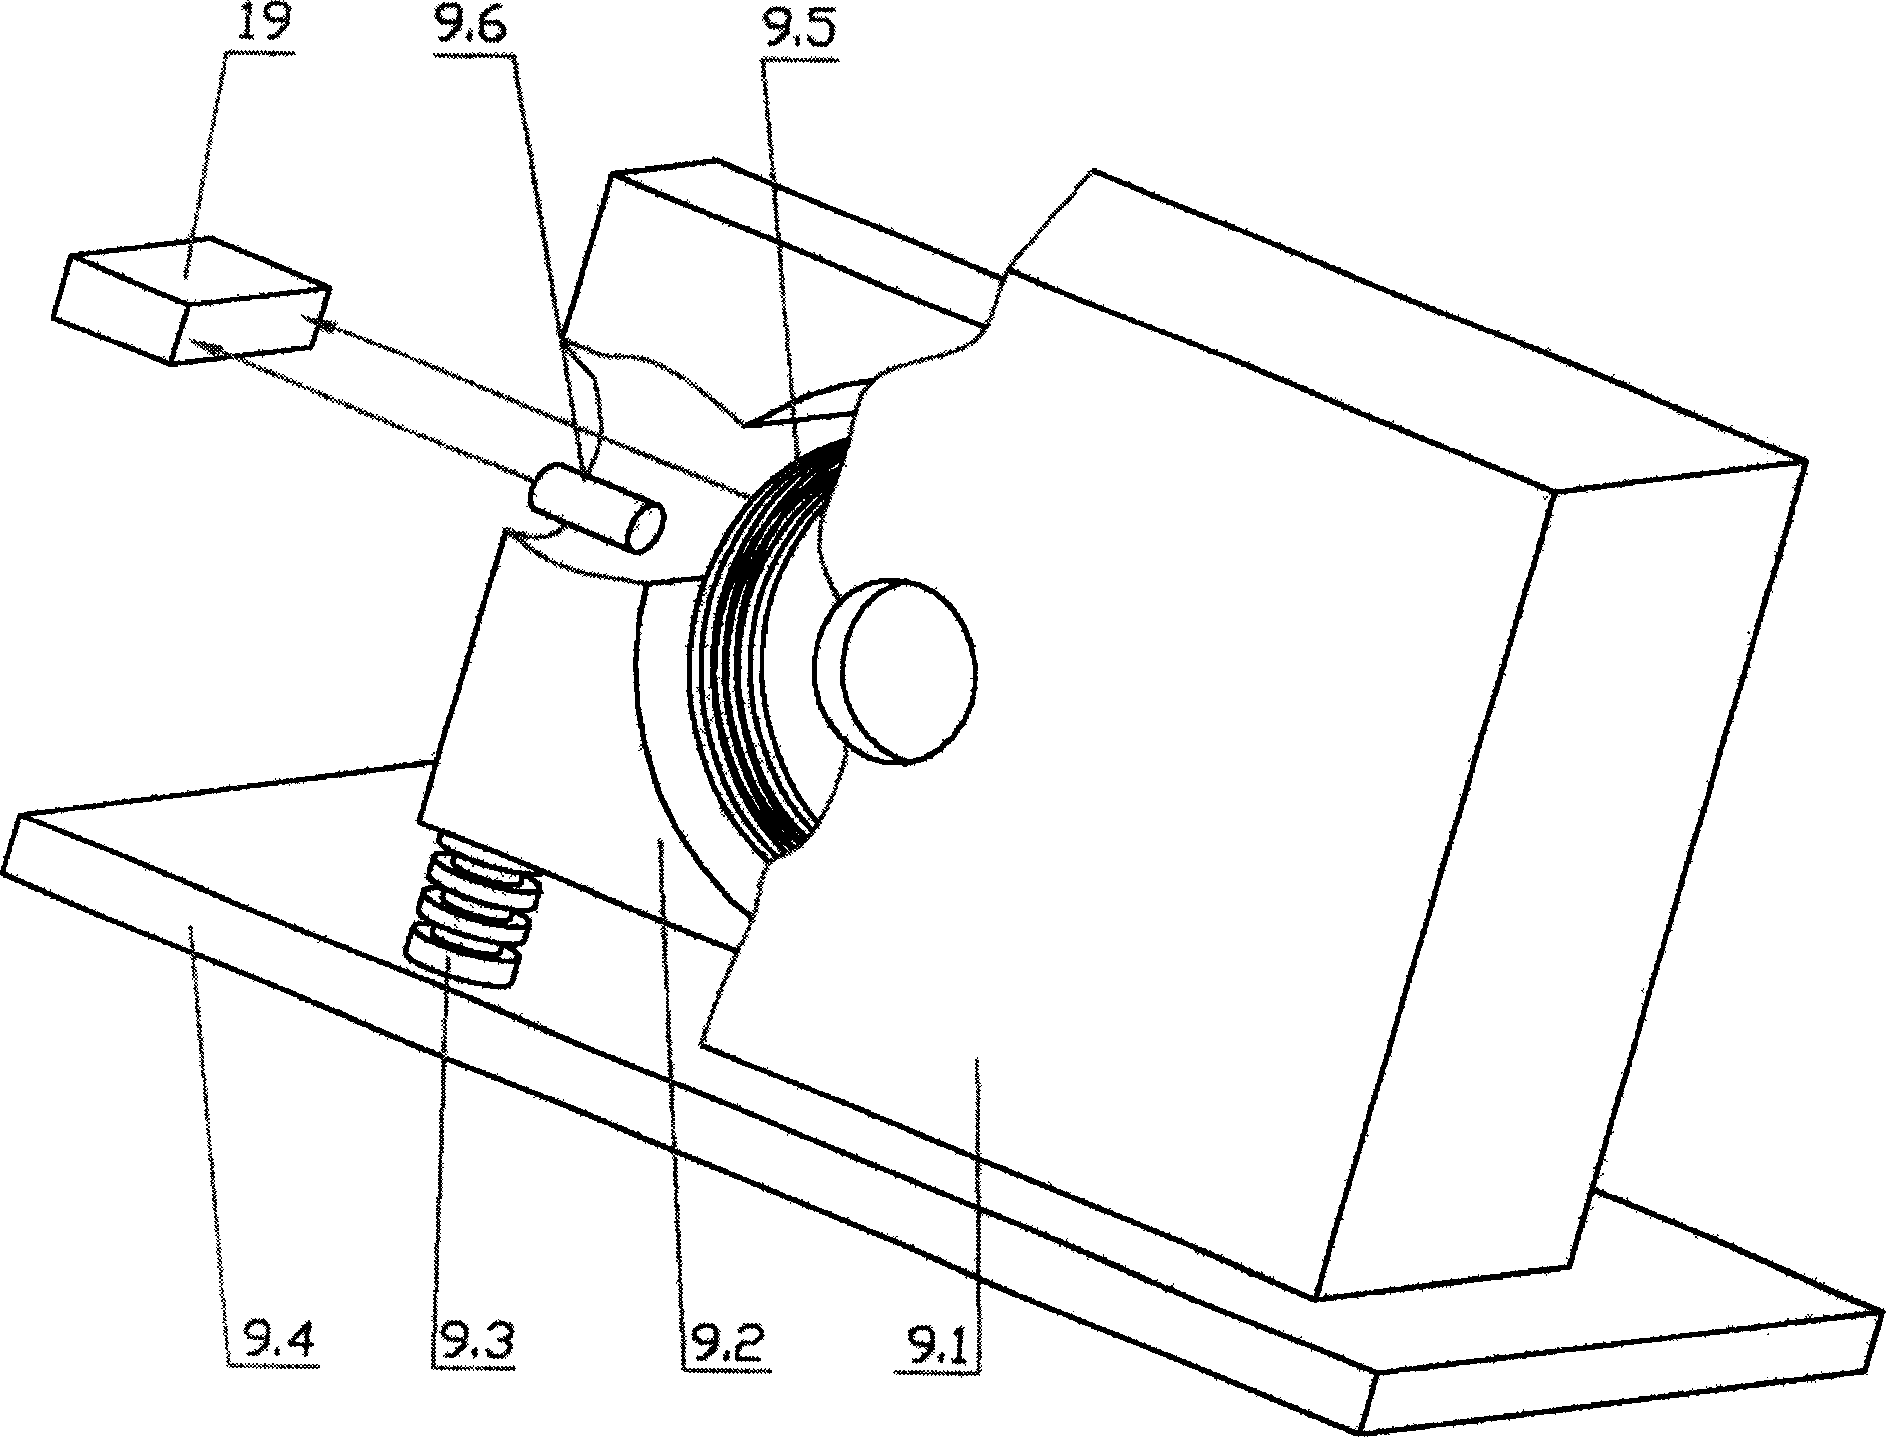 Spectrophotometer with controllable temp. sample chamber